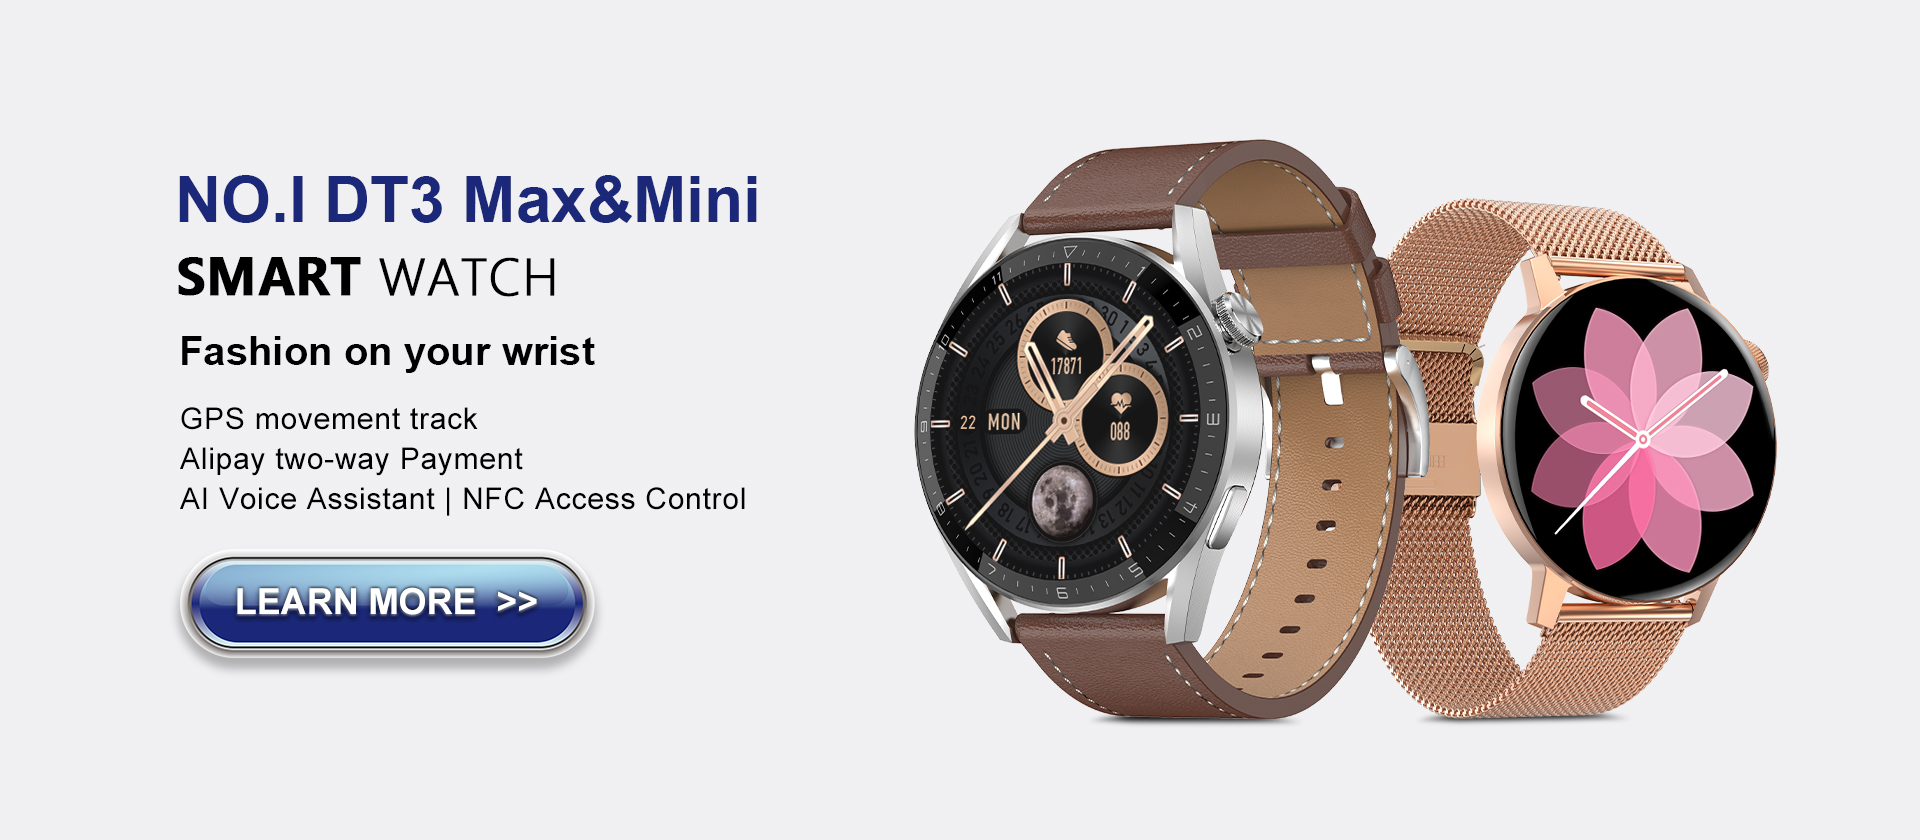 dt3max and dt3mini are couple models with GPS movement track, Alipay two-way Payment, AI Voice Assistant, NFC Access Control